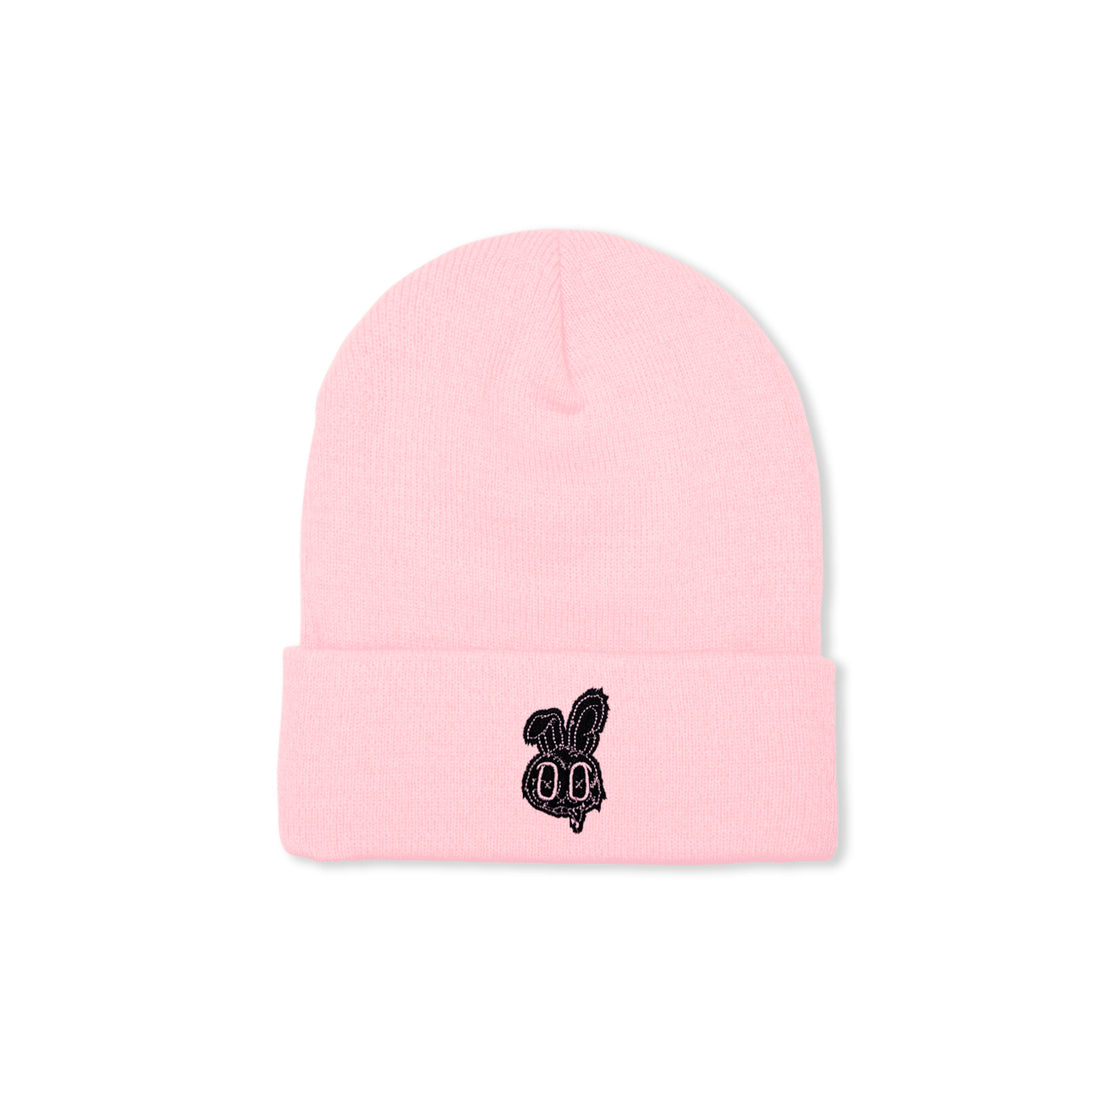 Sippy - Bunny - Pink Beanie